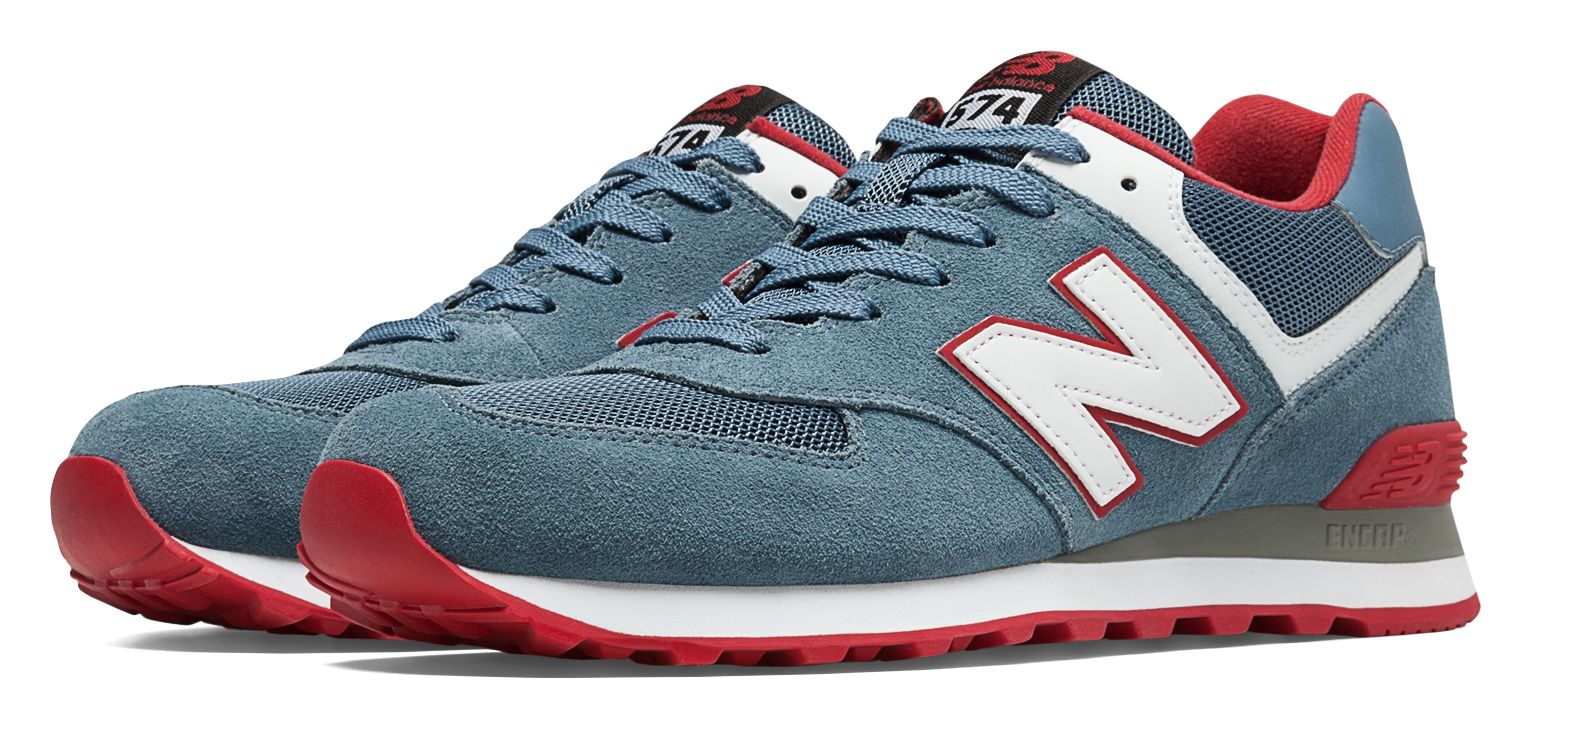 new balance outlet 574